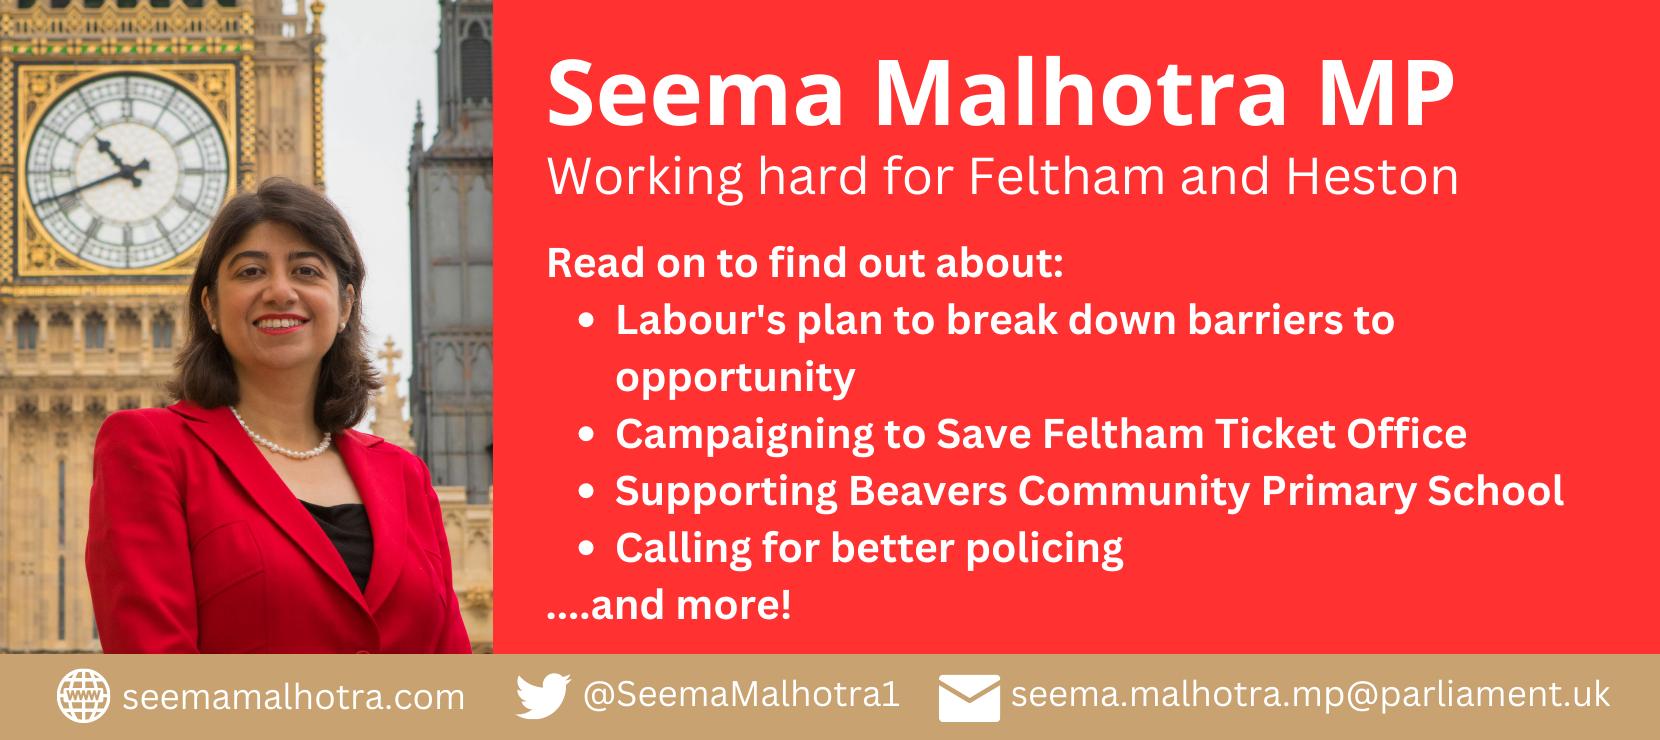 Header image reading "Seema Malhotra MP: working hard for Feltham and Heston. Read on to find out about: Labour